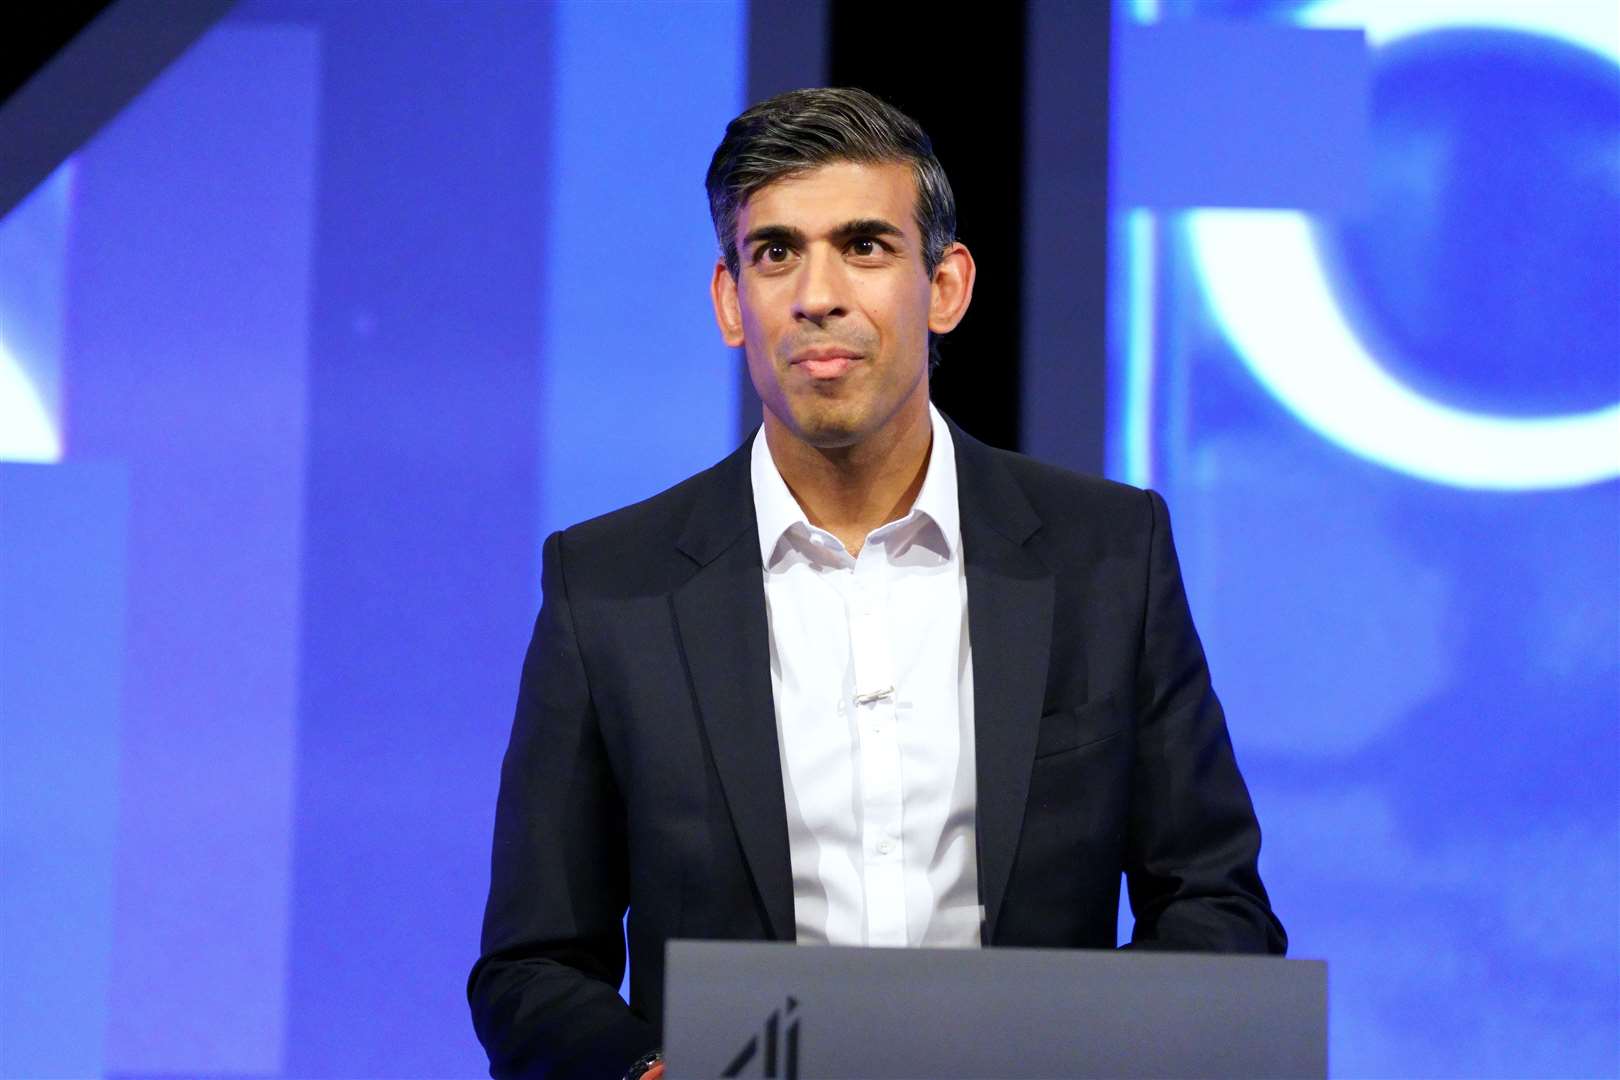 Rishi Sunak has appealed to Brexit-backing Tories for support in his campaign (Victoria Jones/PA)